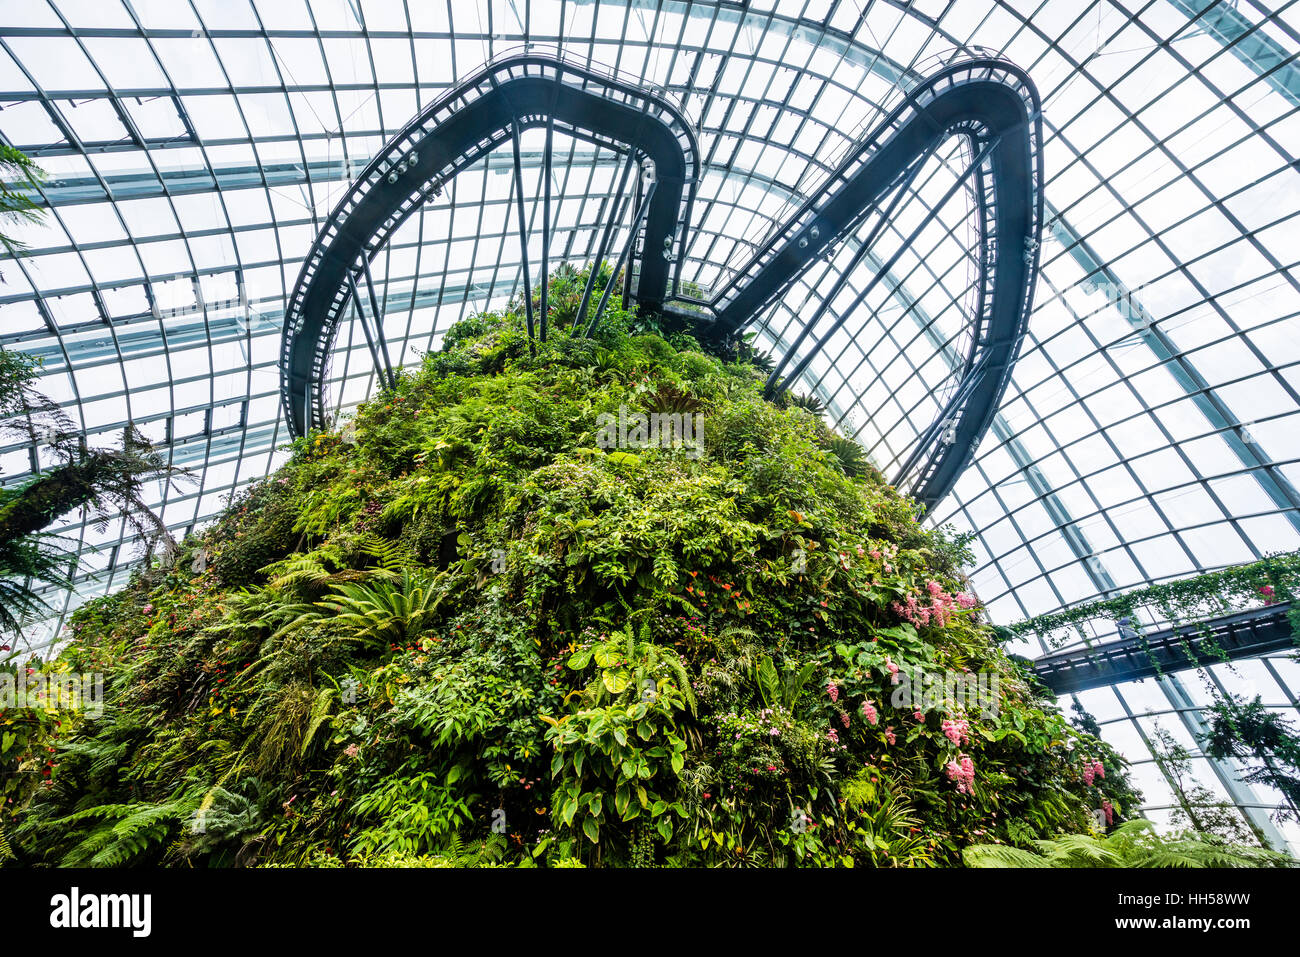 Singapore, Gardens by the Bay, lush vegetation mountain with cloud walk within the giant Cloud Forest  green house Stock Photo